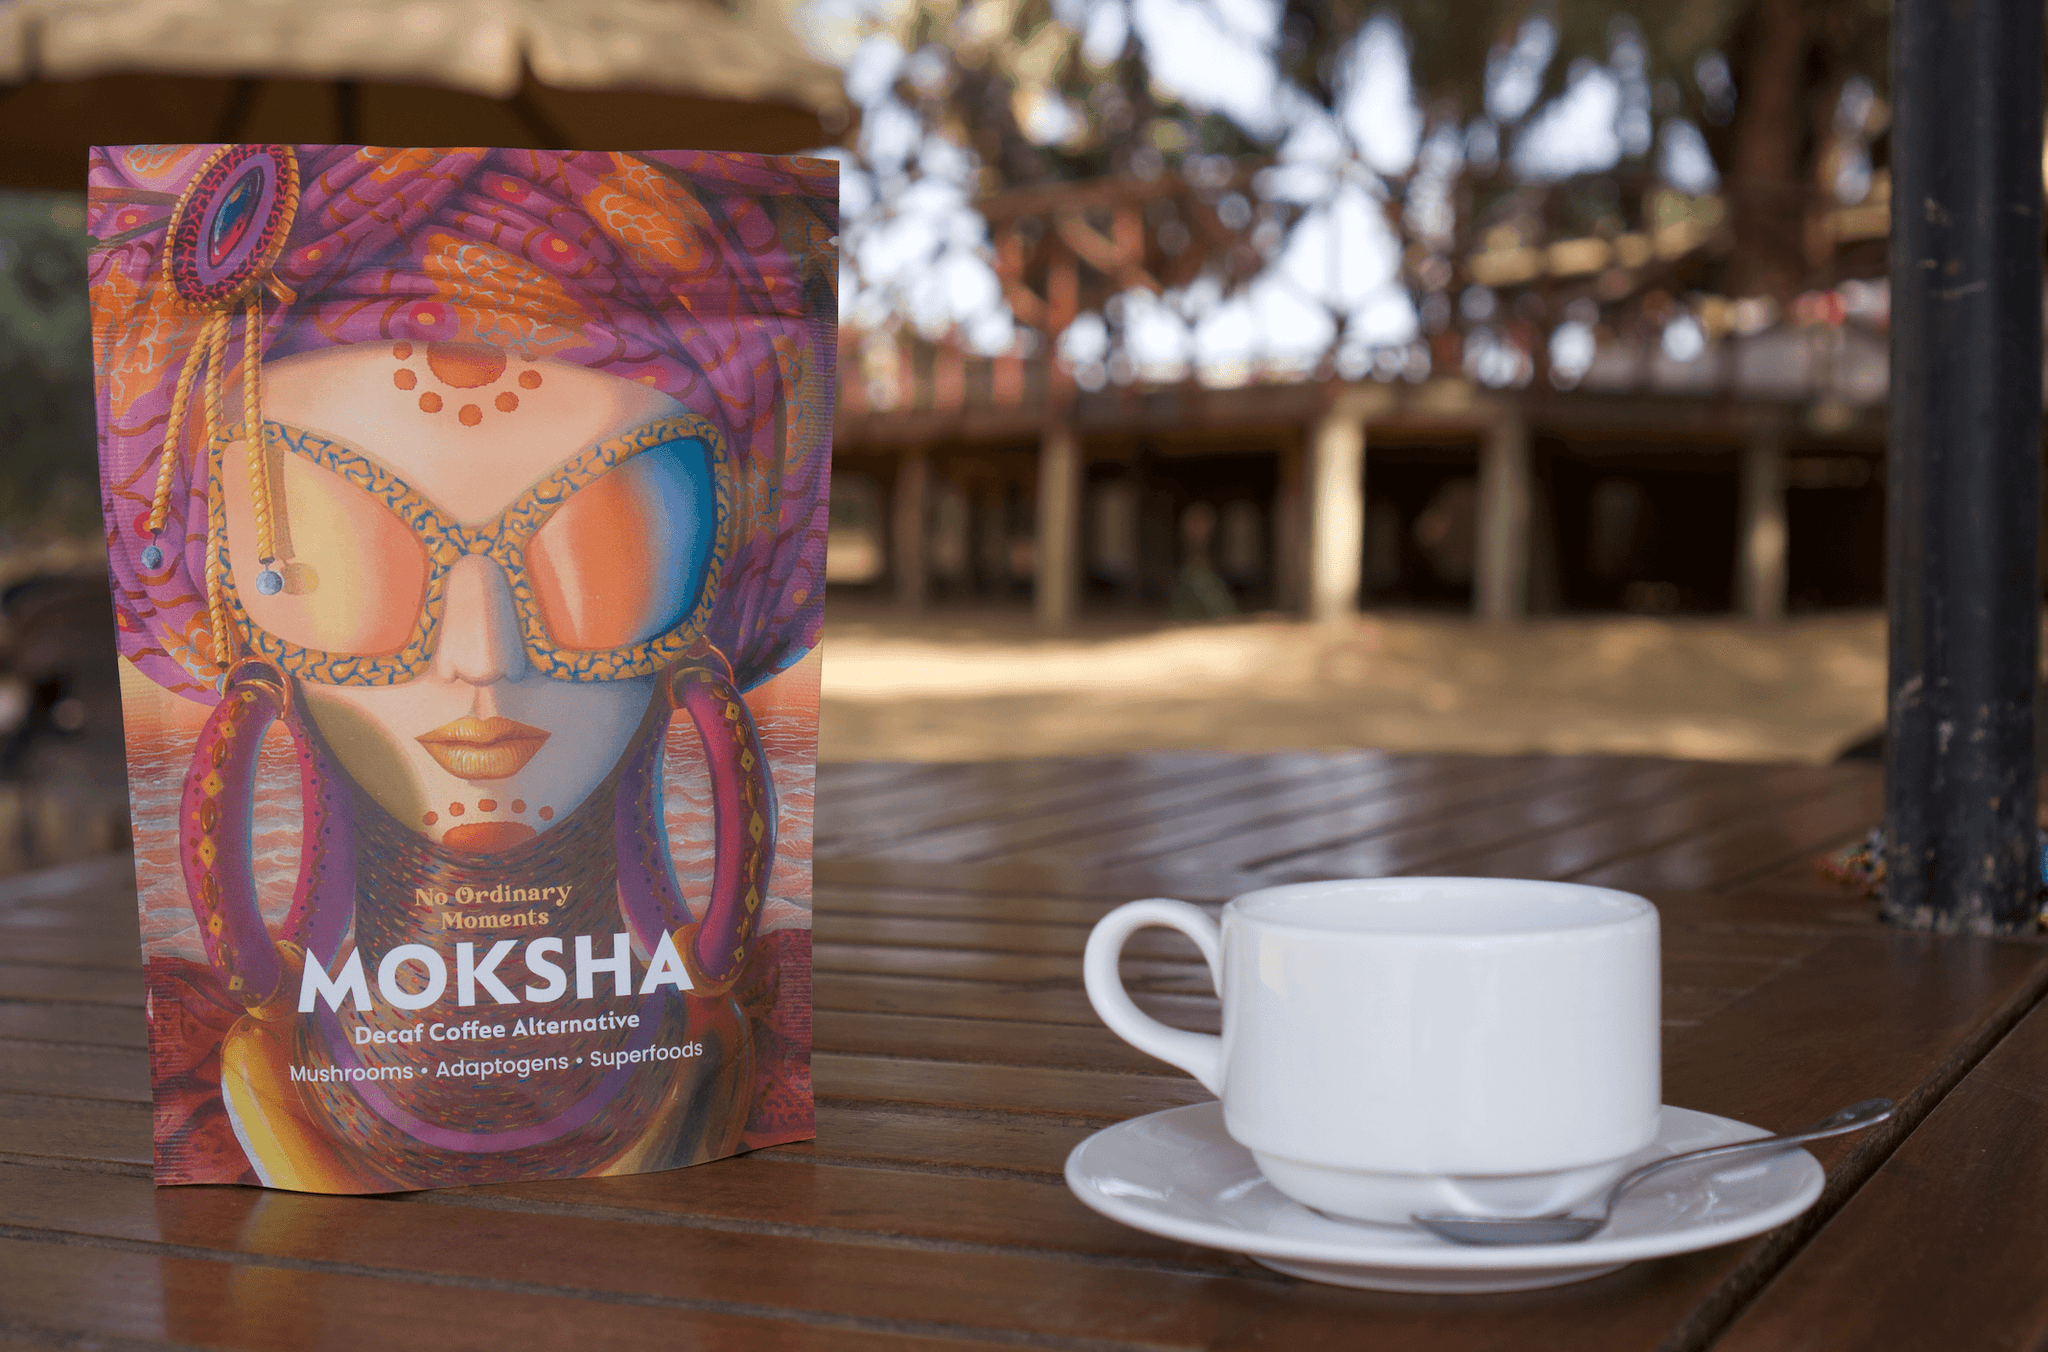 Moksha The New Mushroom Coffee Launches in The UK with Lions Mane, Chaga, Reishi and More - No Ordinary Moments